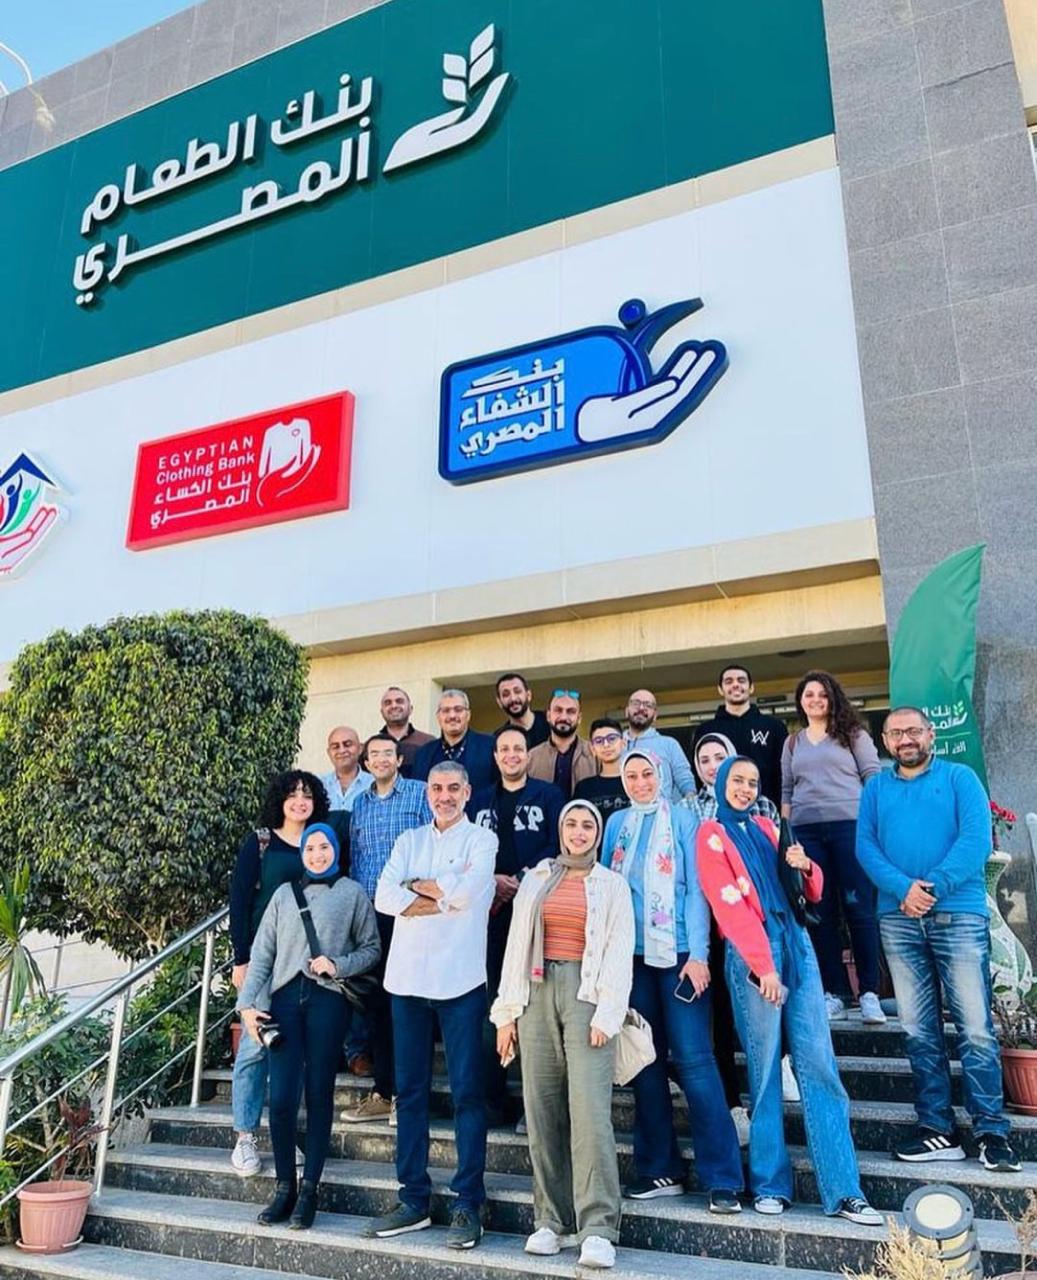 When we count the blessings, we count our ESR volunteers twice. Continuing the tradition, our volunteers helped in packing Ramadan boxes that will be distributed during the holy month partnering with Egypt Food Bank.&nbsp;